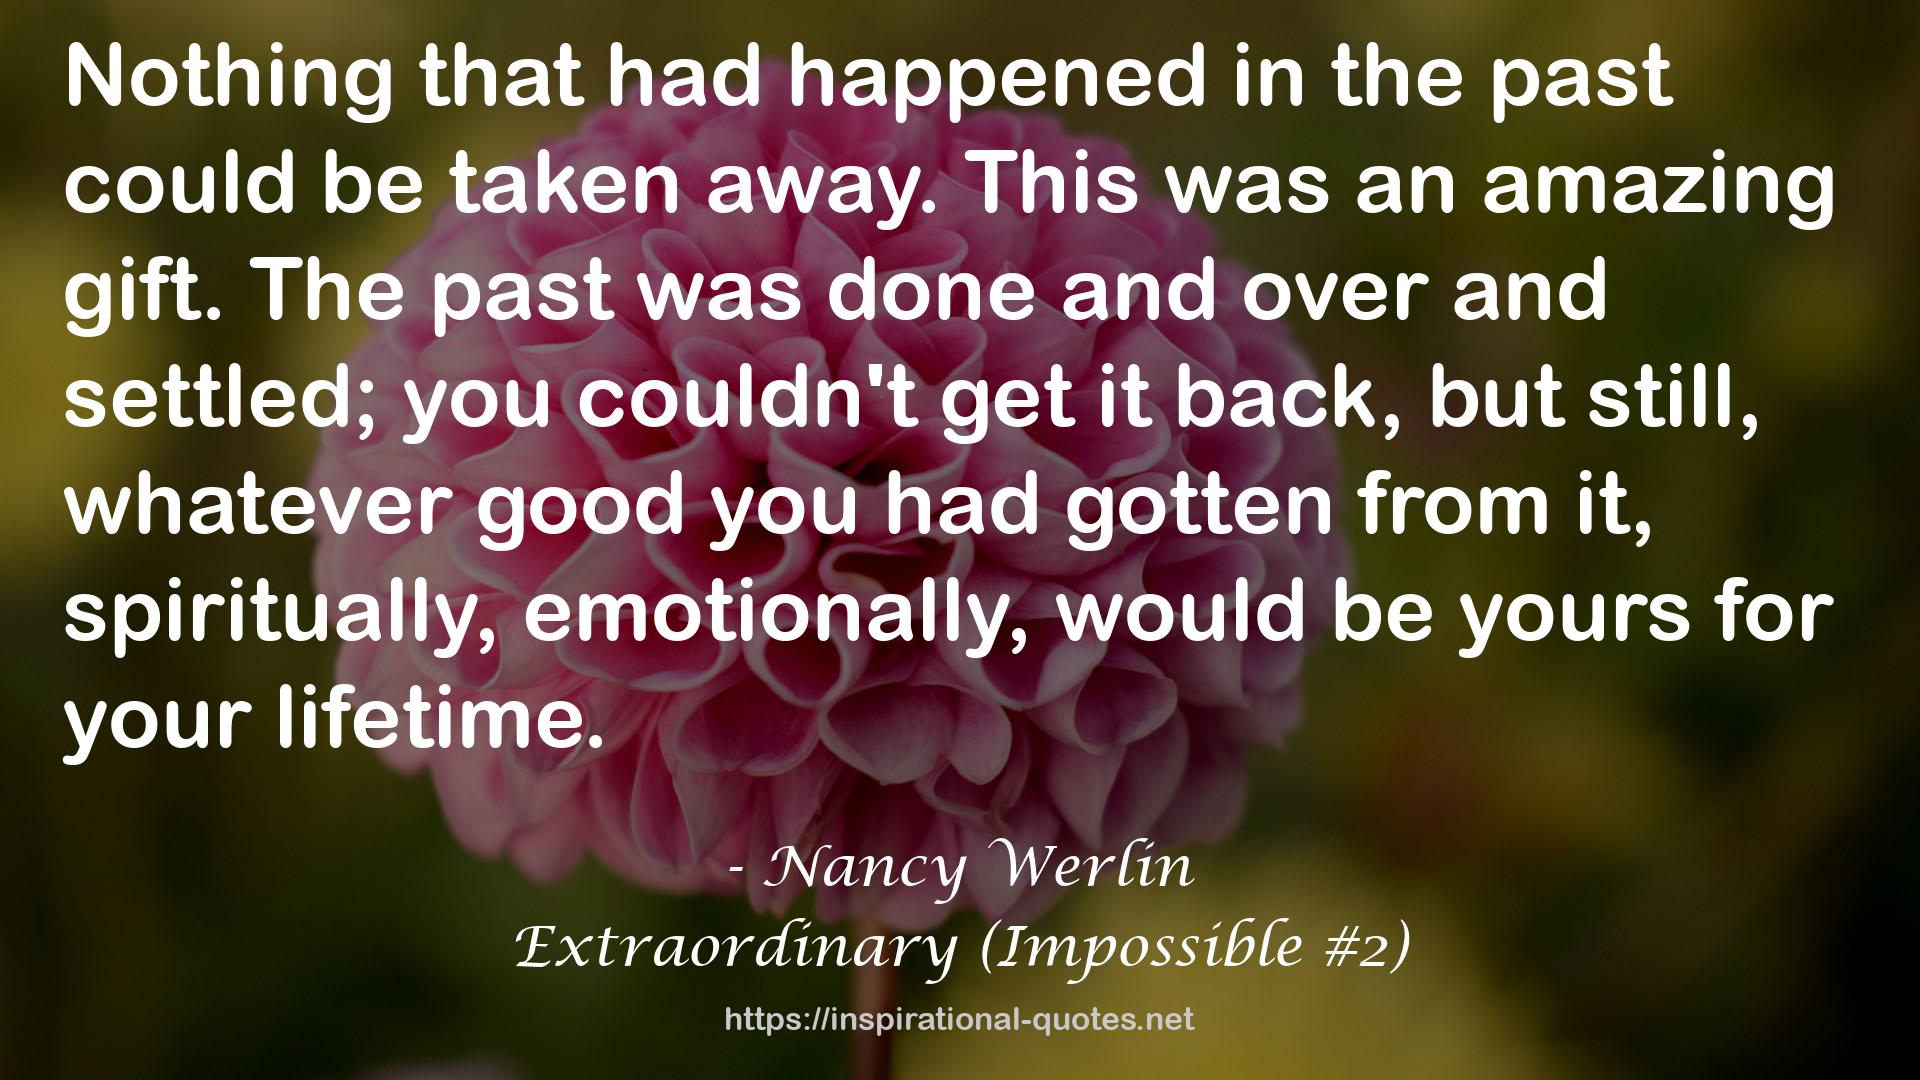 Extraordinary (Impossible #2) QUOTES